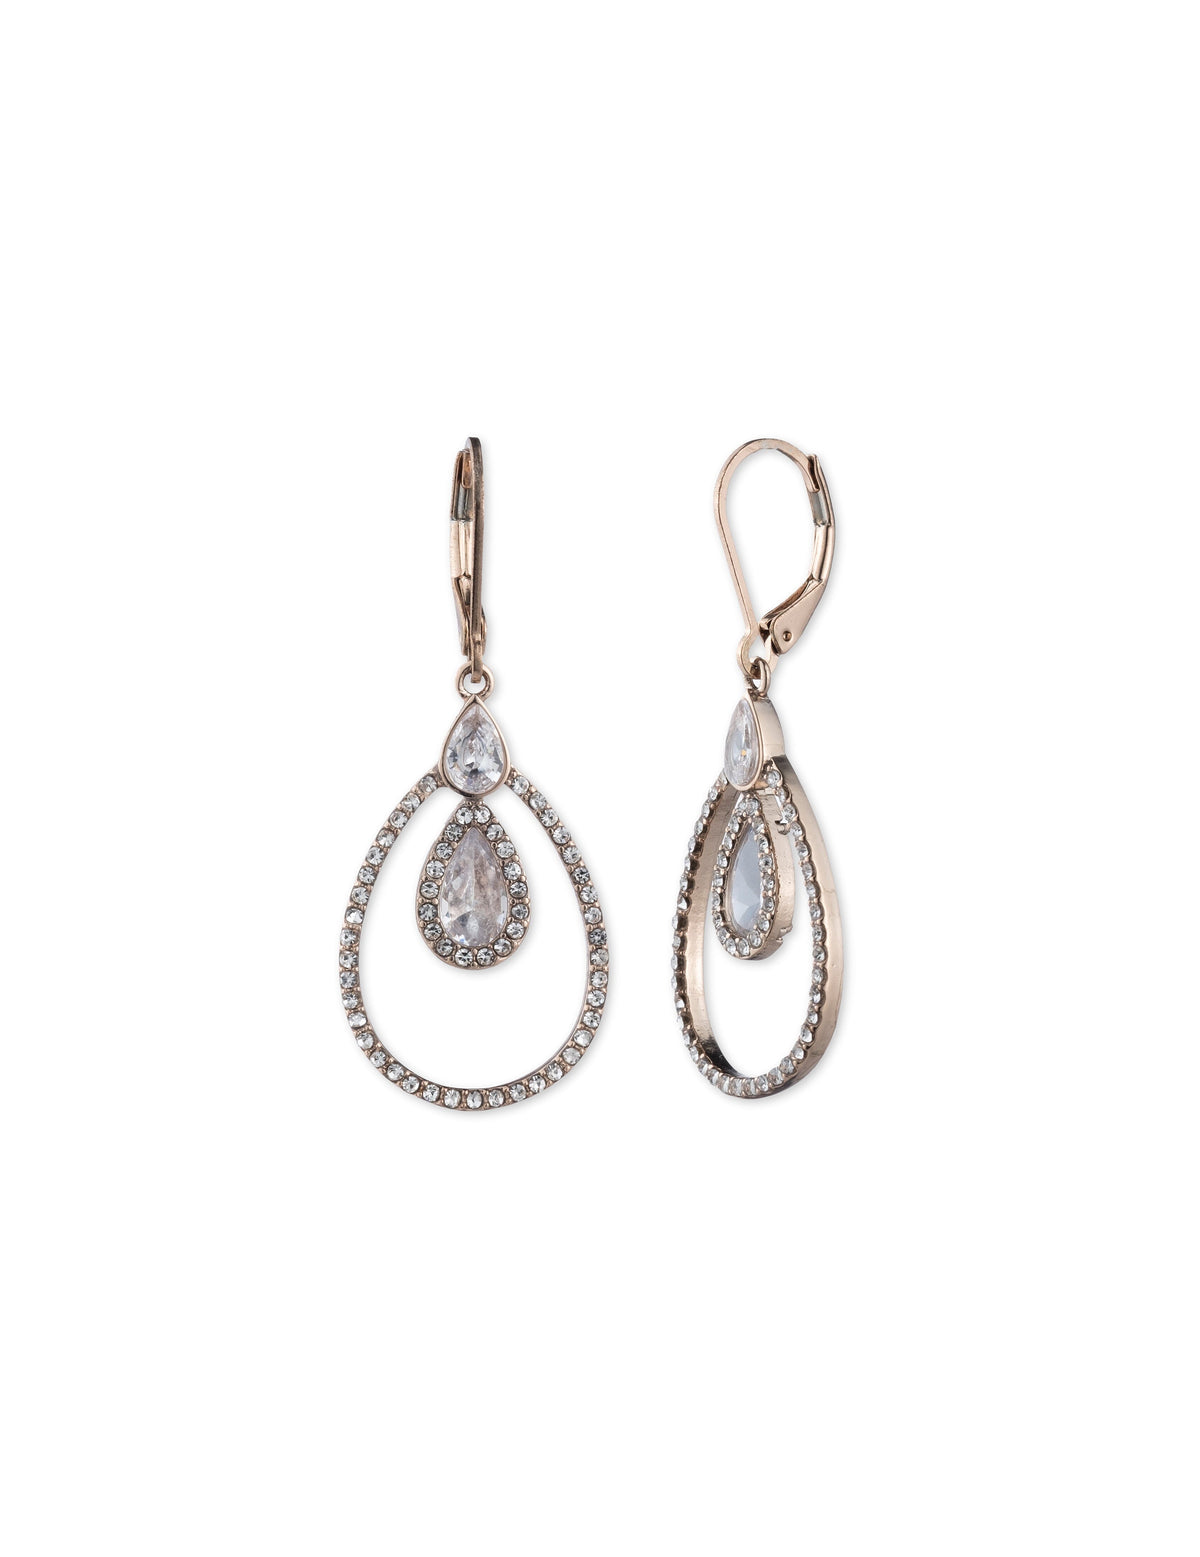 Anne Klein Rose-Tone Rose Gold-Tone Crystal Pave Rim Drop Earrings